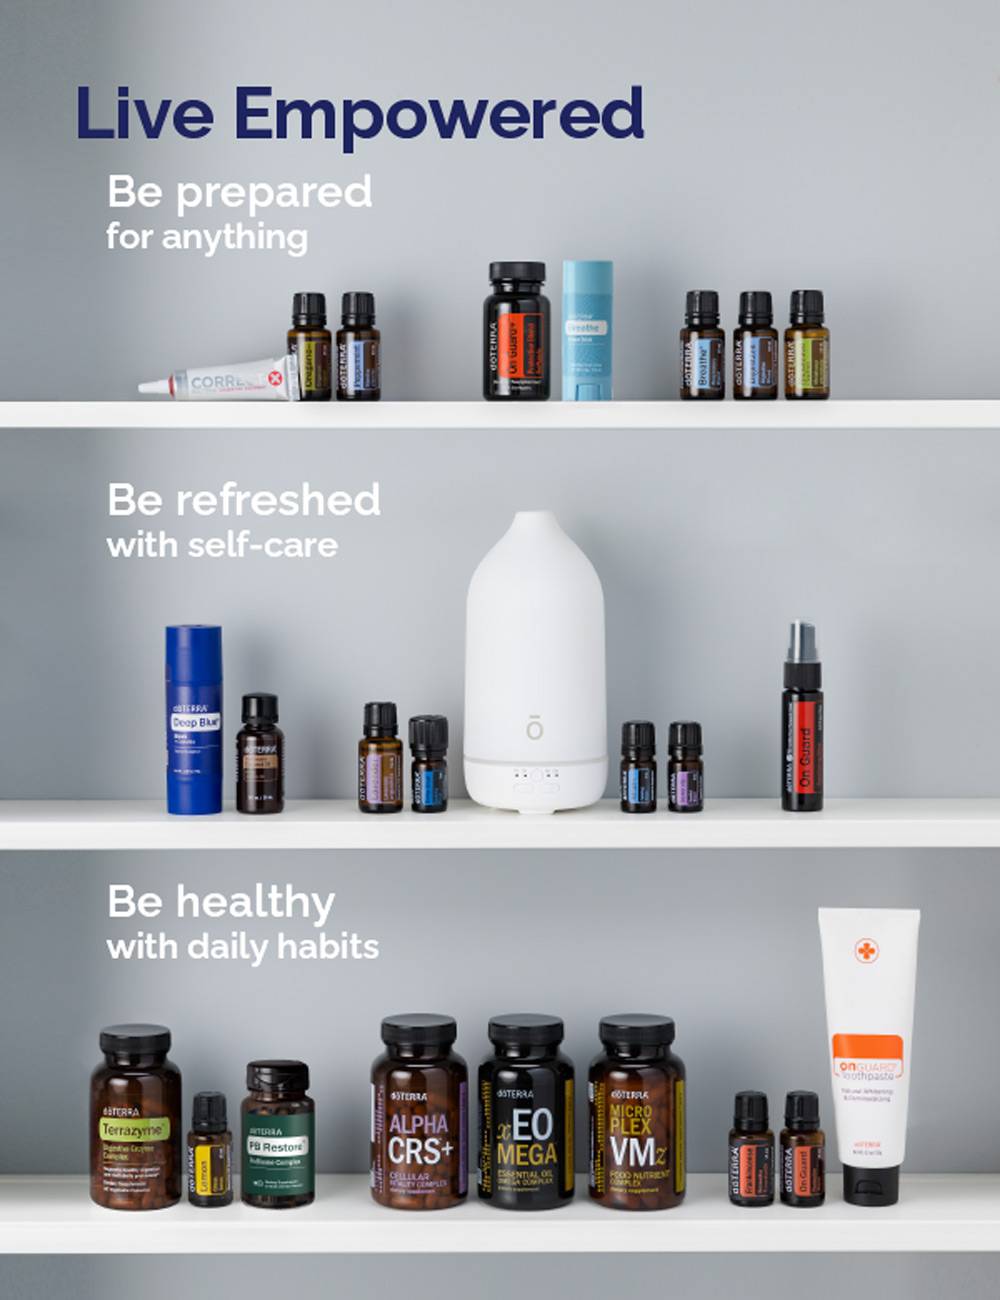 A collection of wellness products on shelves featuring essential oils, a diffuser, supplements, and personal care items with motivational slogans.